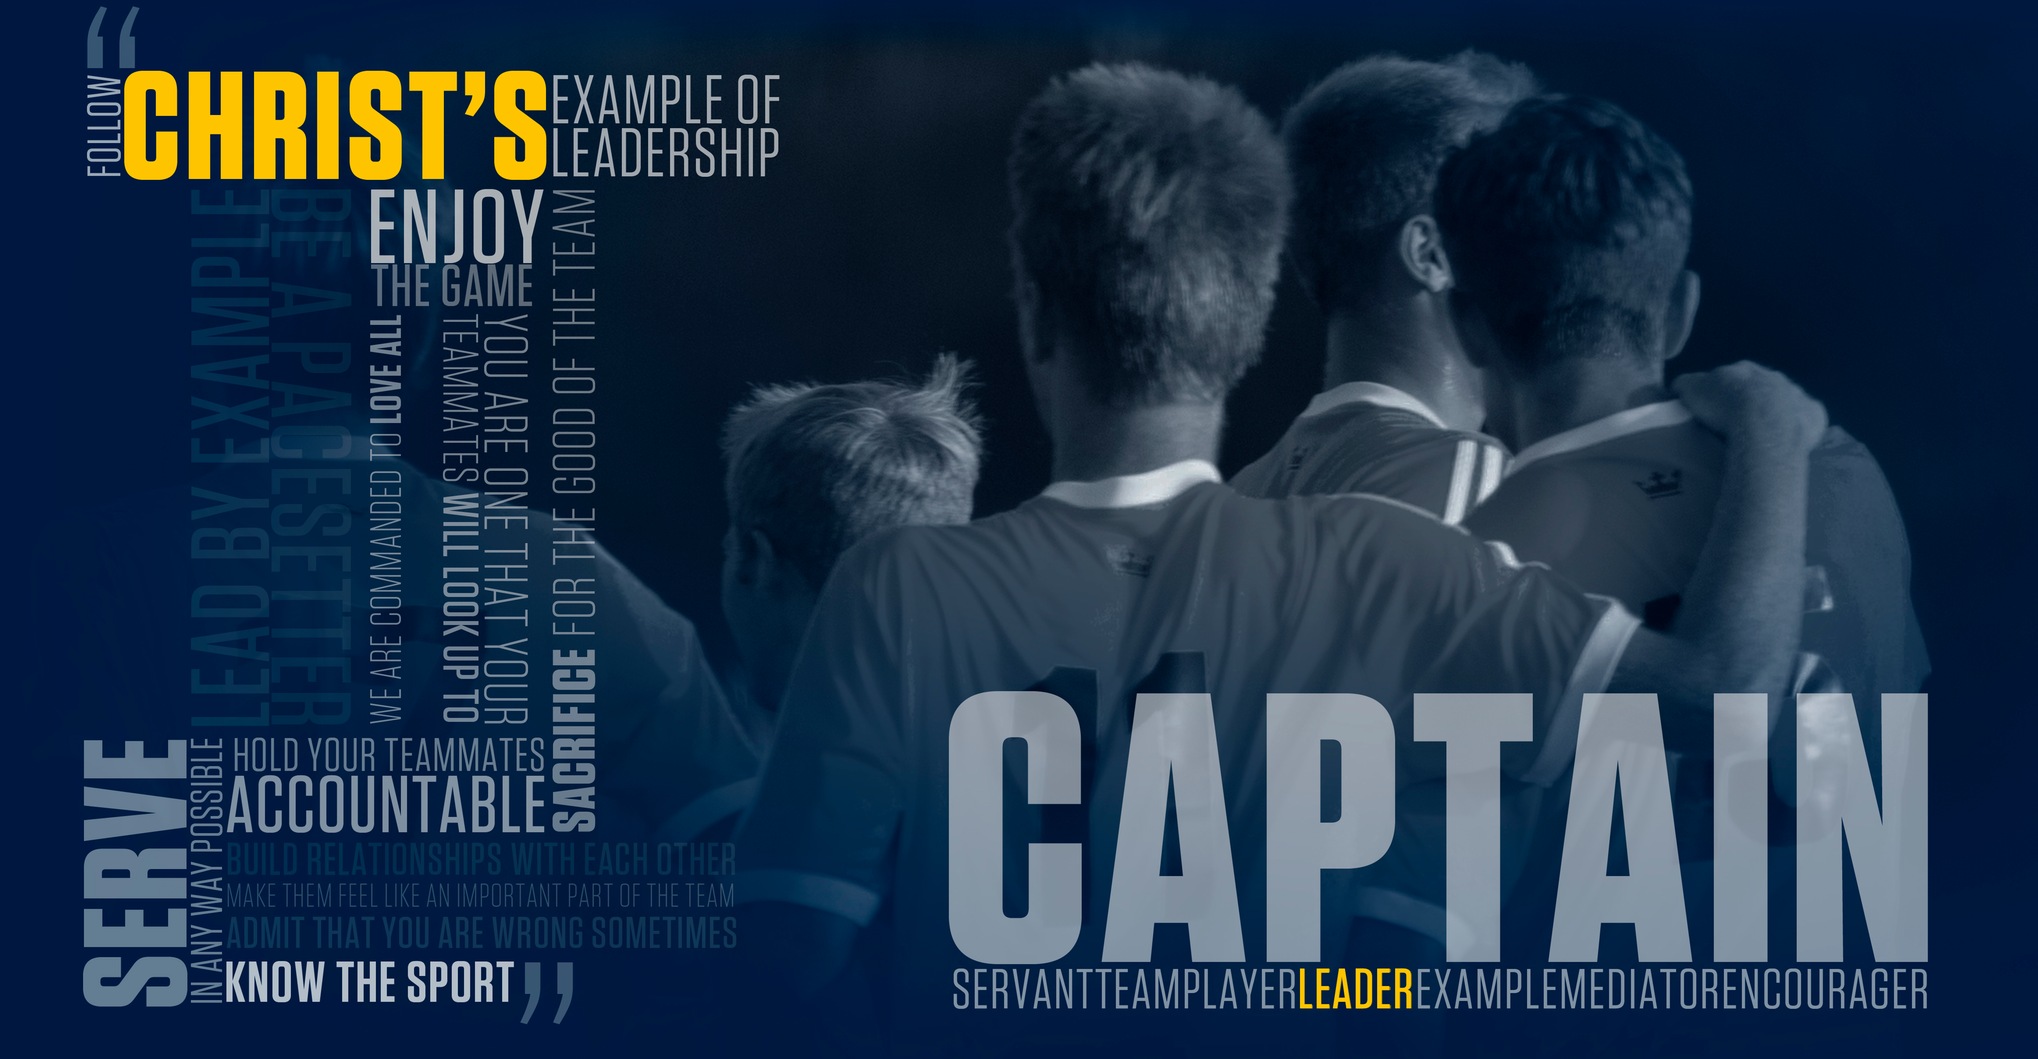 Lessons on Leadership from the Captains